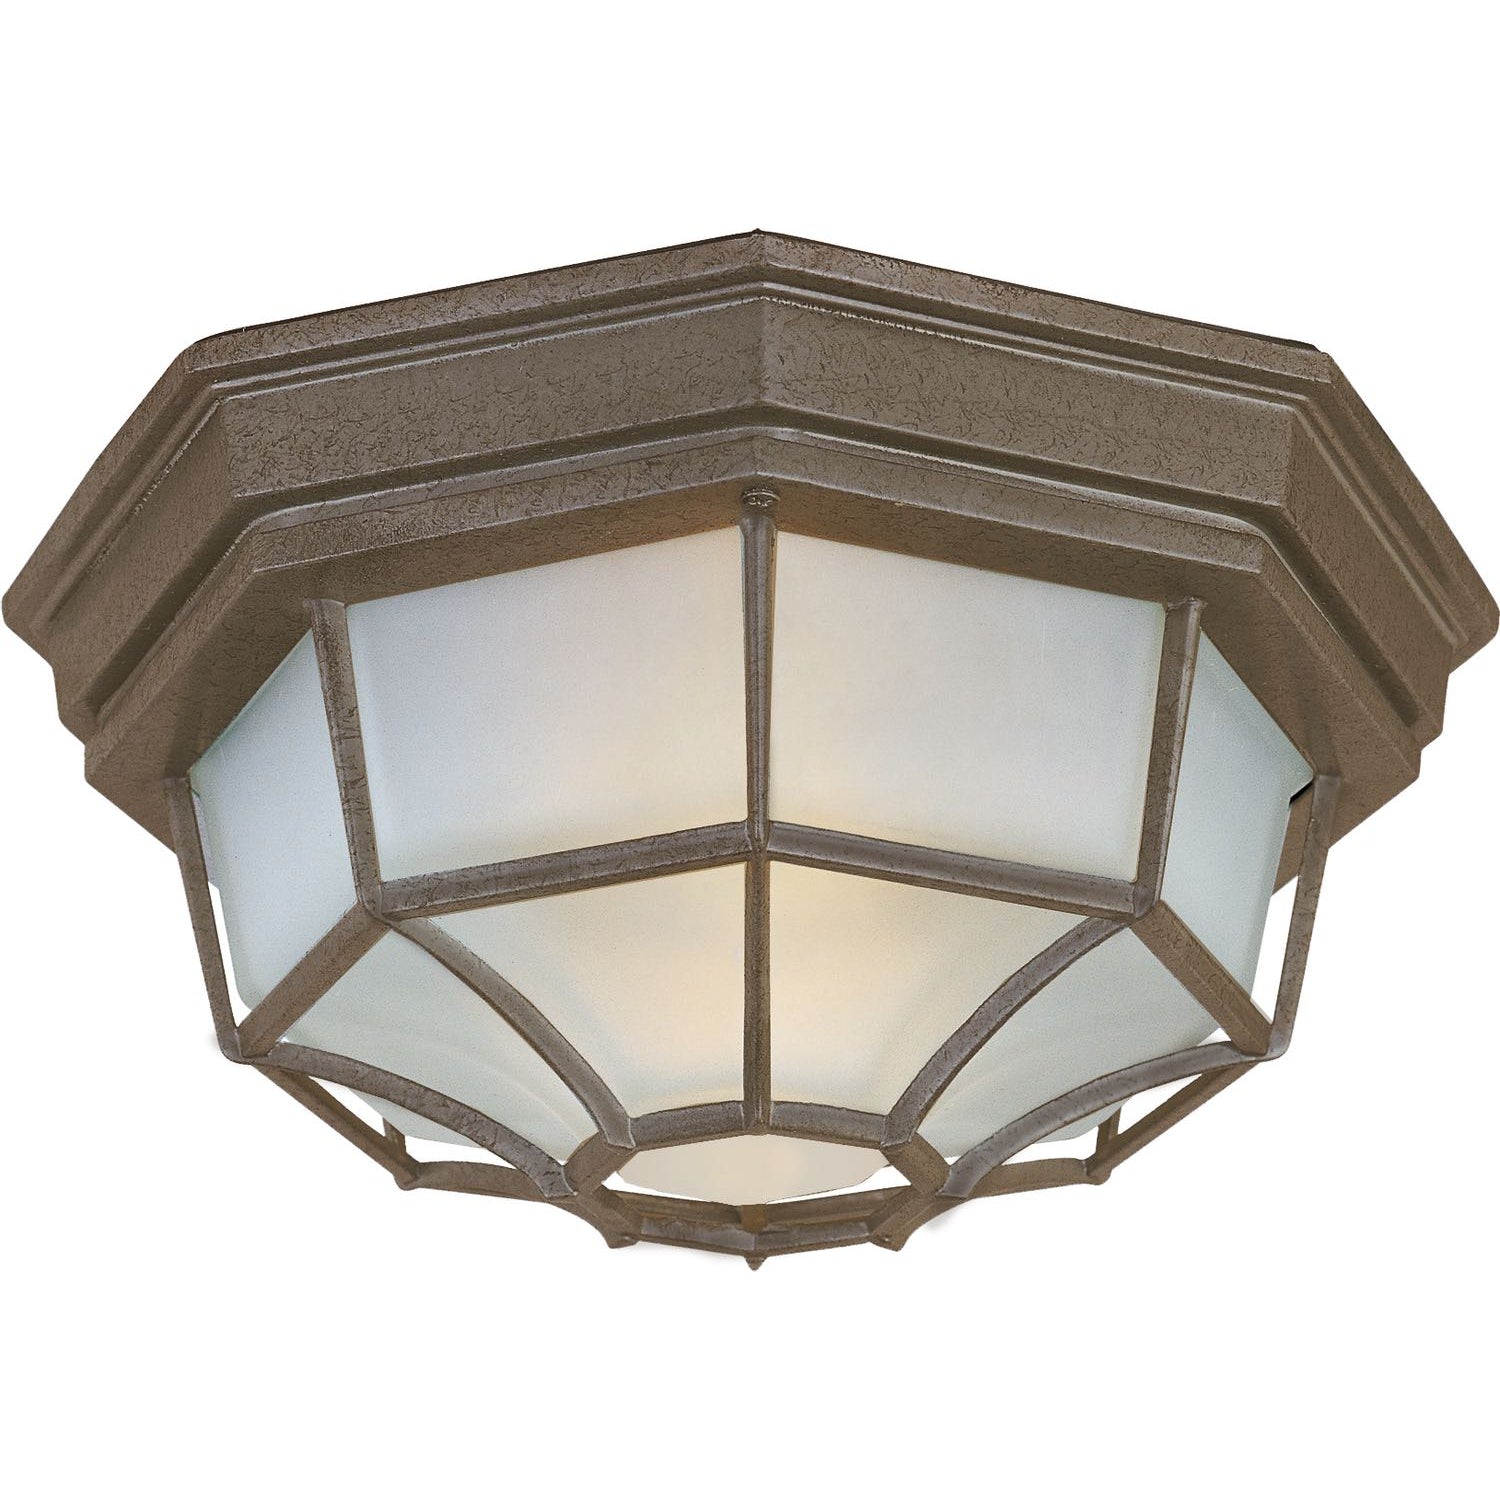 Crown Hill Outdoor Ceiling Light Rust Patina